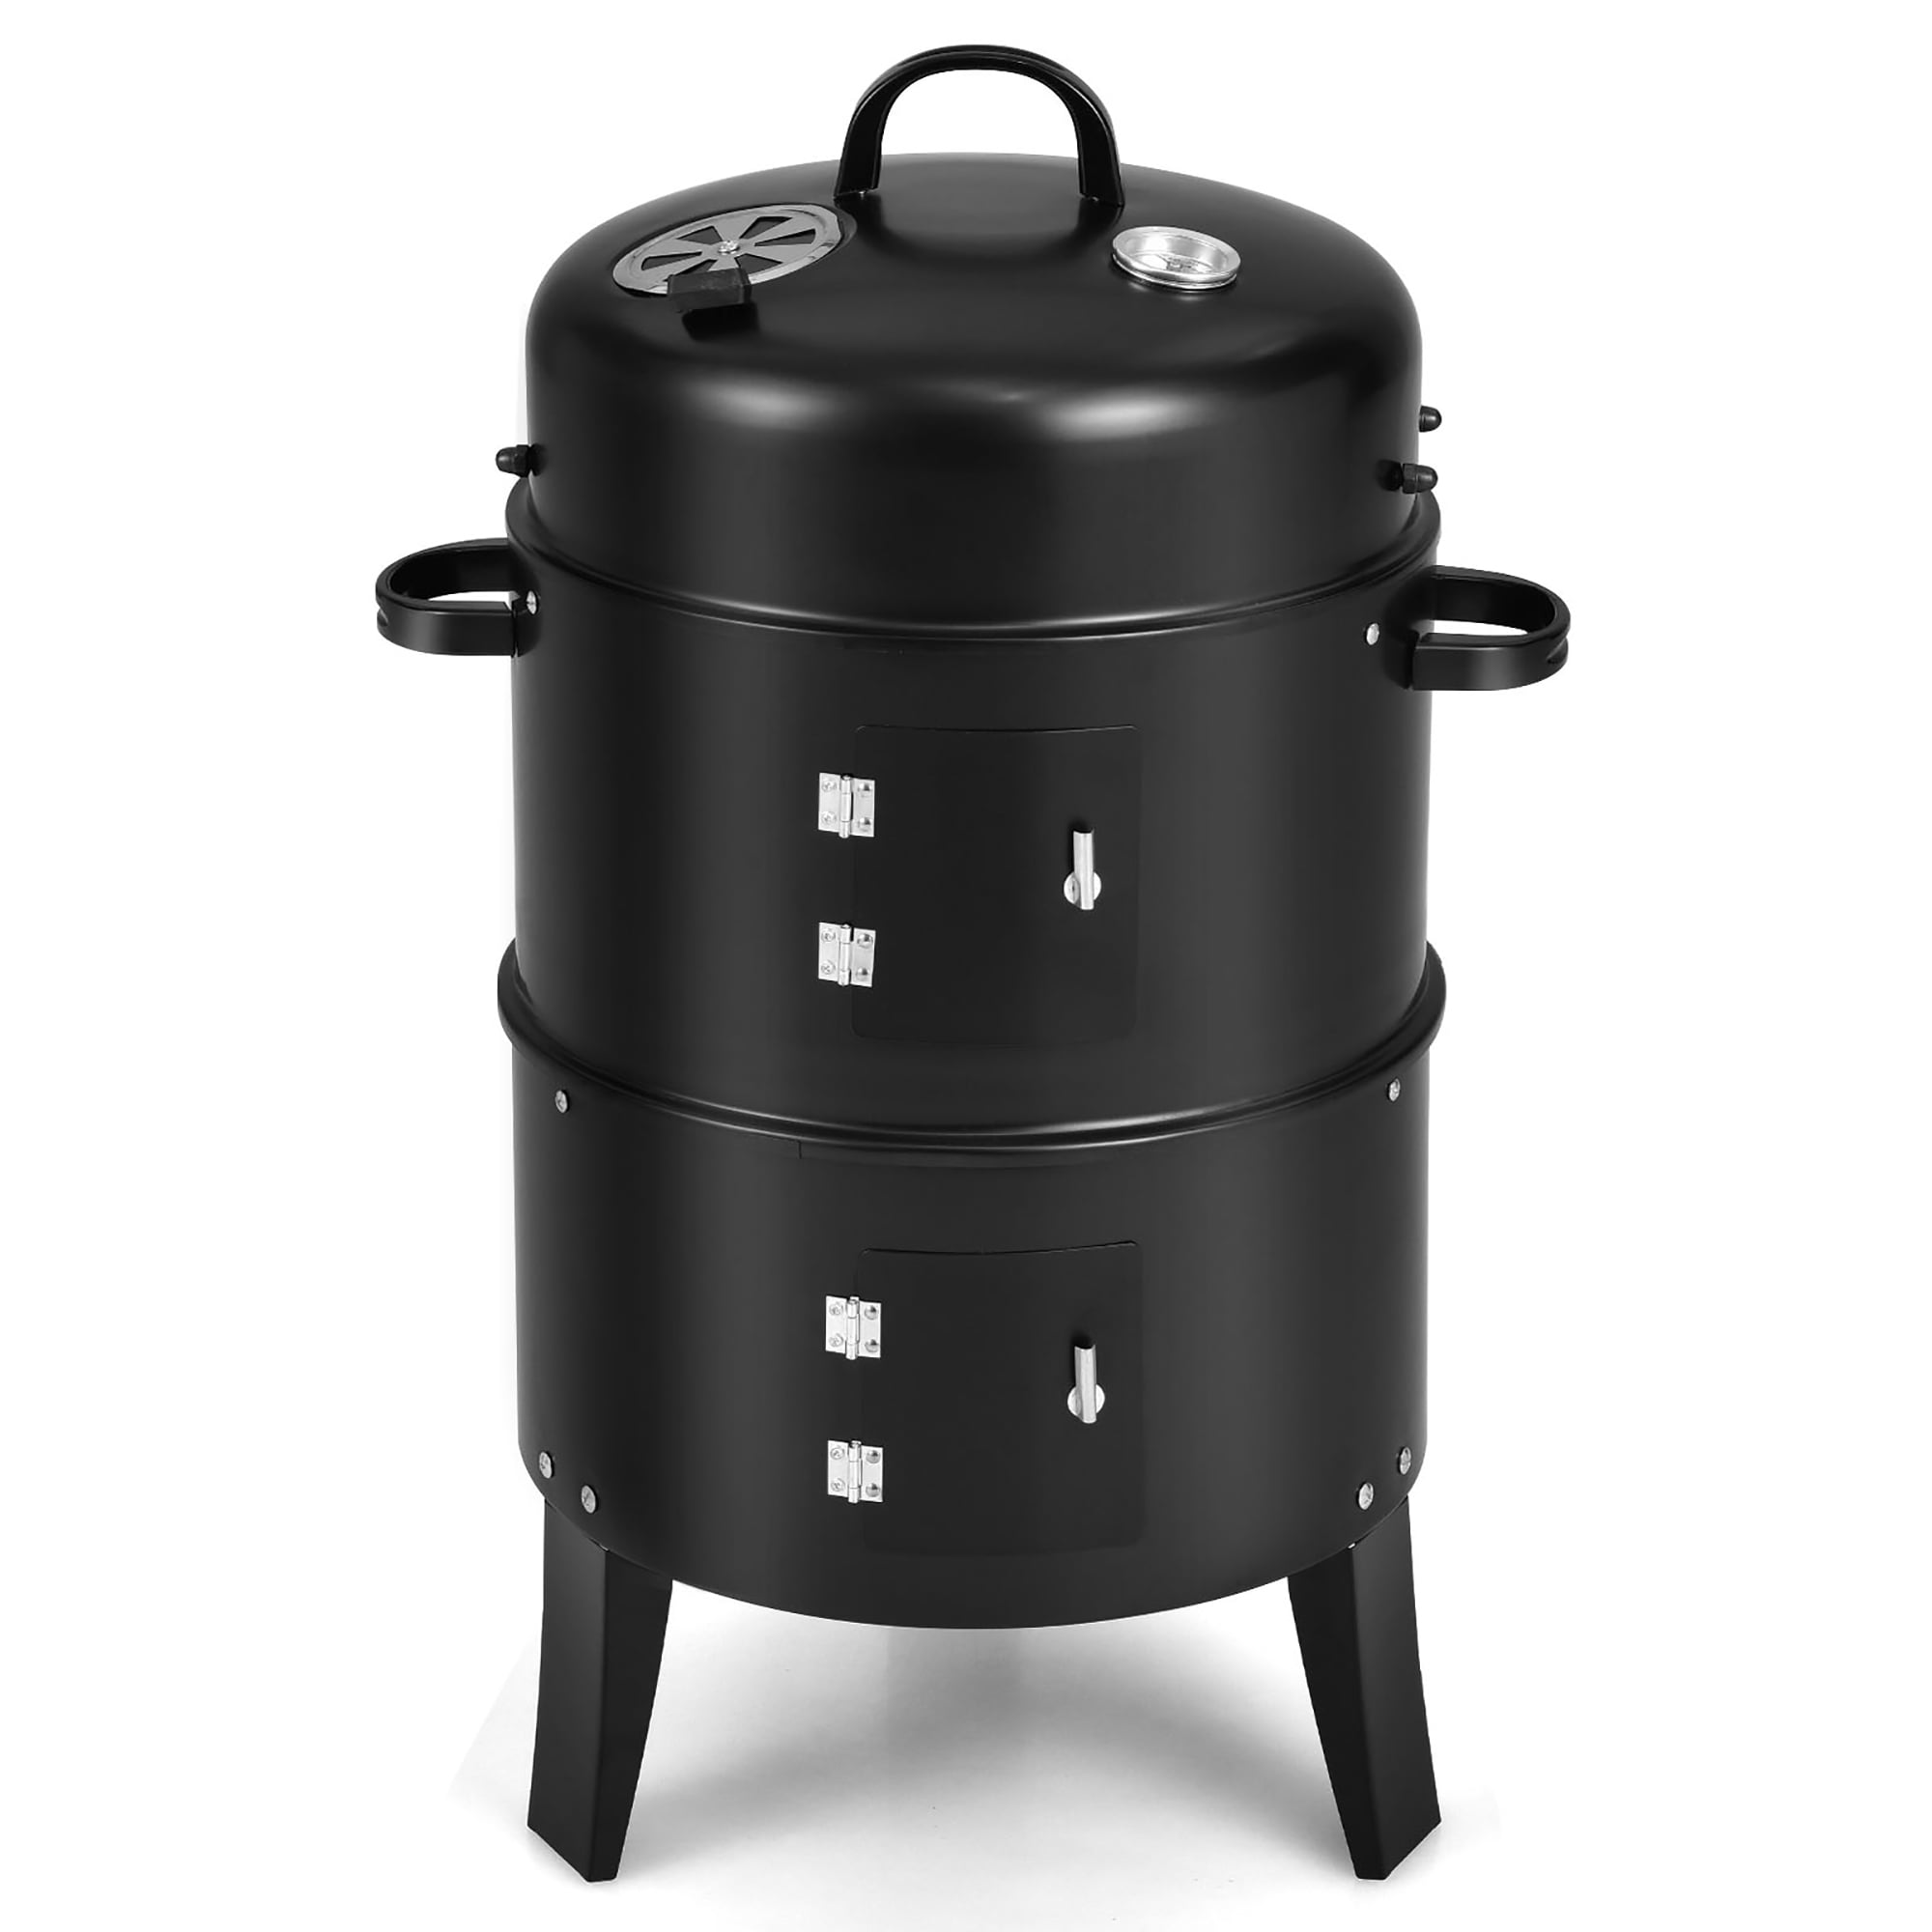 Costway3-in-1 Charcoal Smoker Portable Smoker Grill with Detachable 2 Layer - Walmart.com